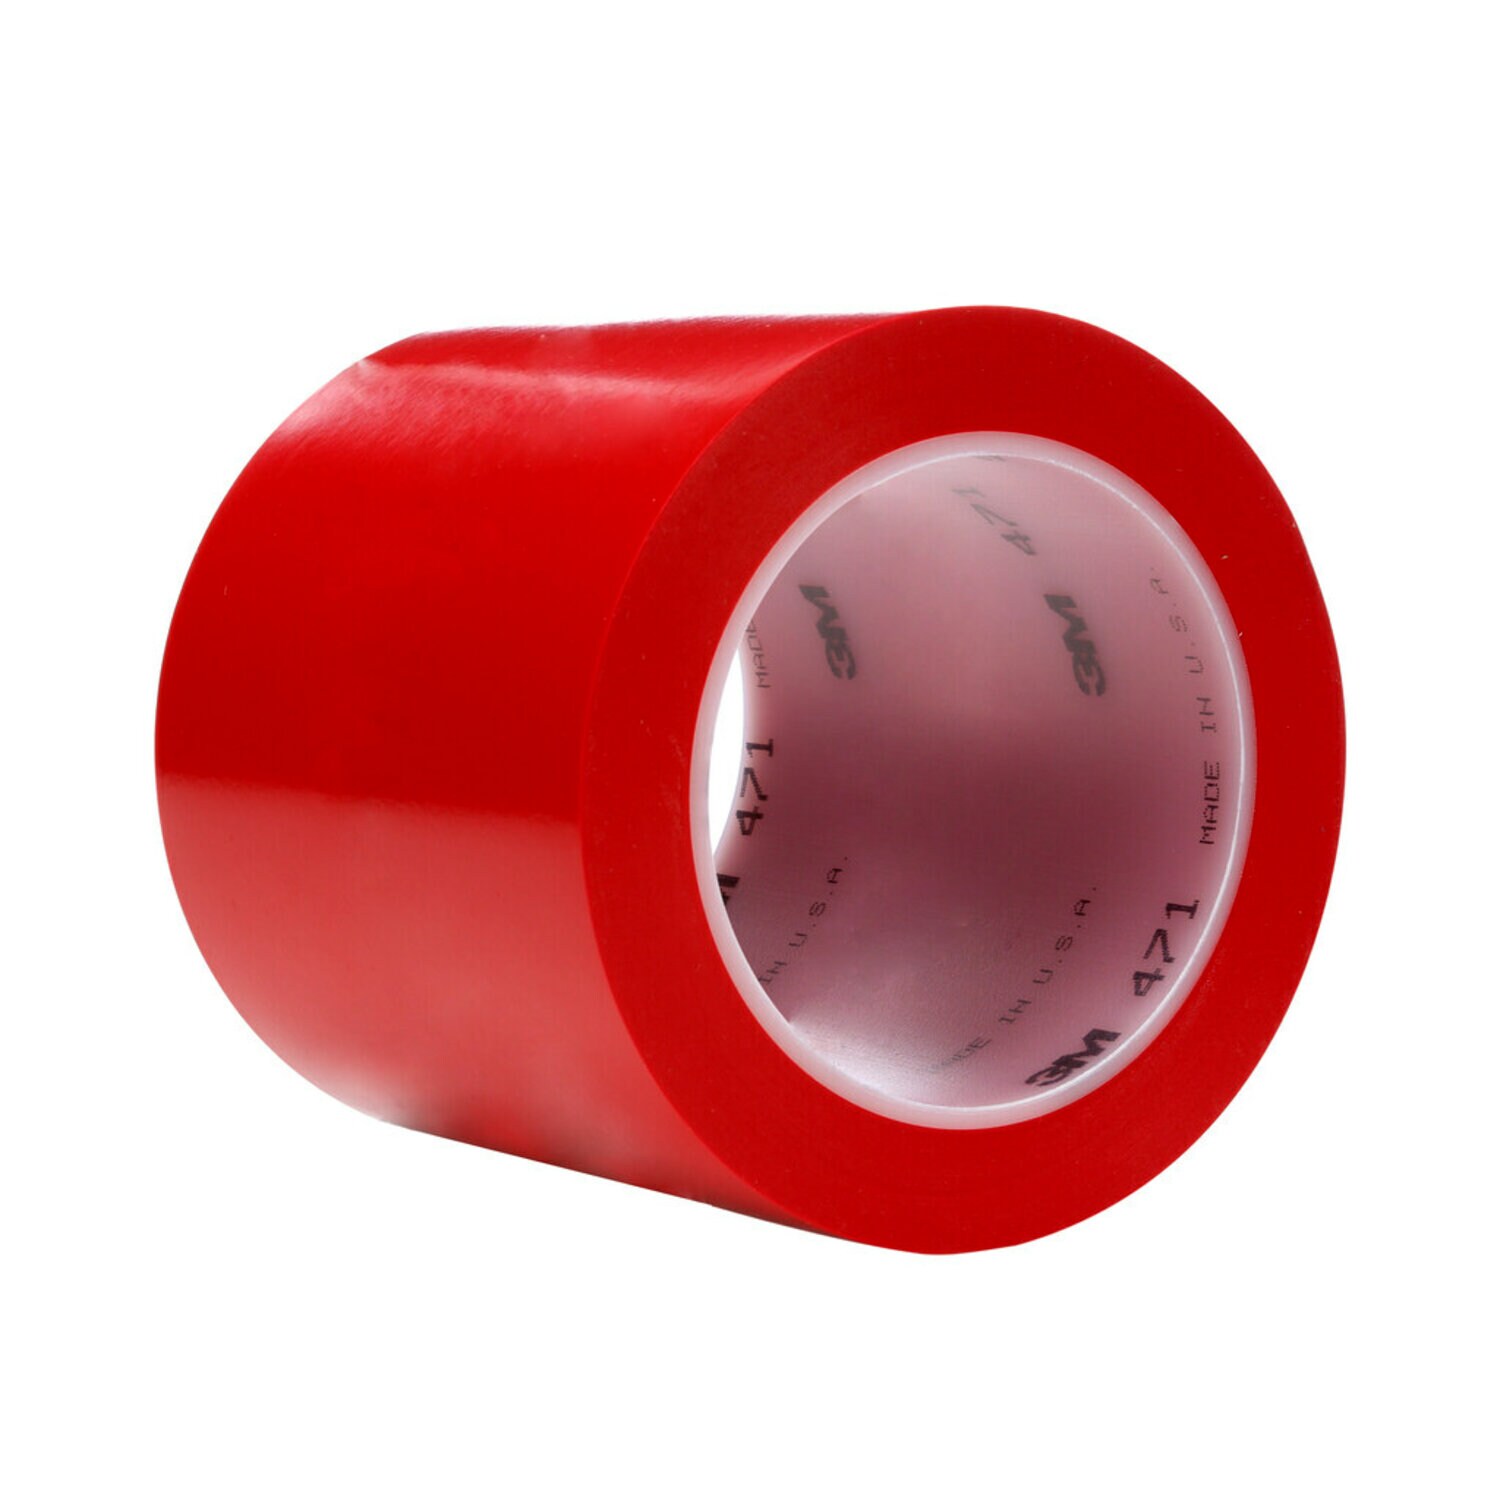 7010292804 - 3M Vinyl Tape 471, Red, 4 in x 36 yd, 5.2 mil, 8 rolls per case,
Individually Wrapped Conveniently Packaged